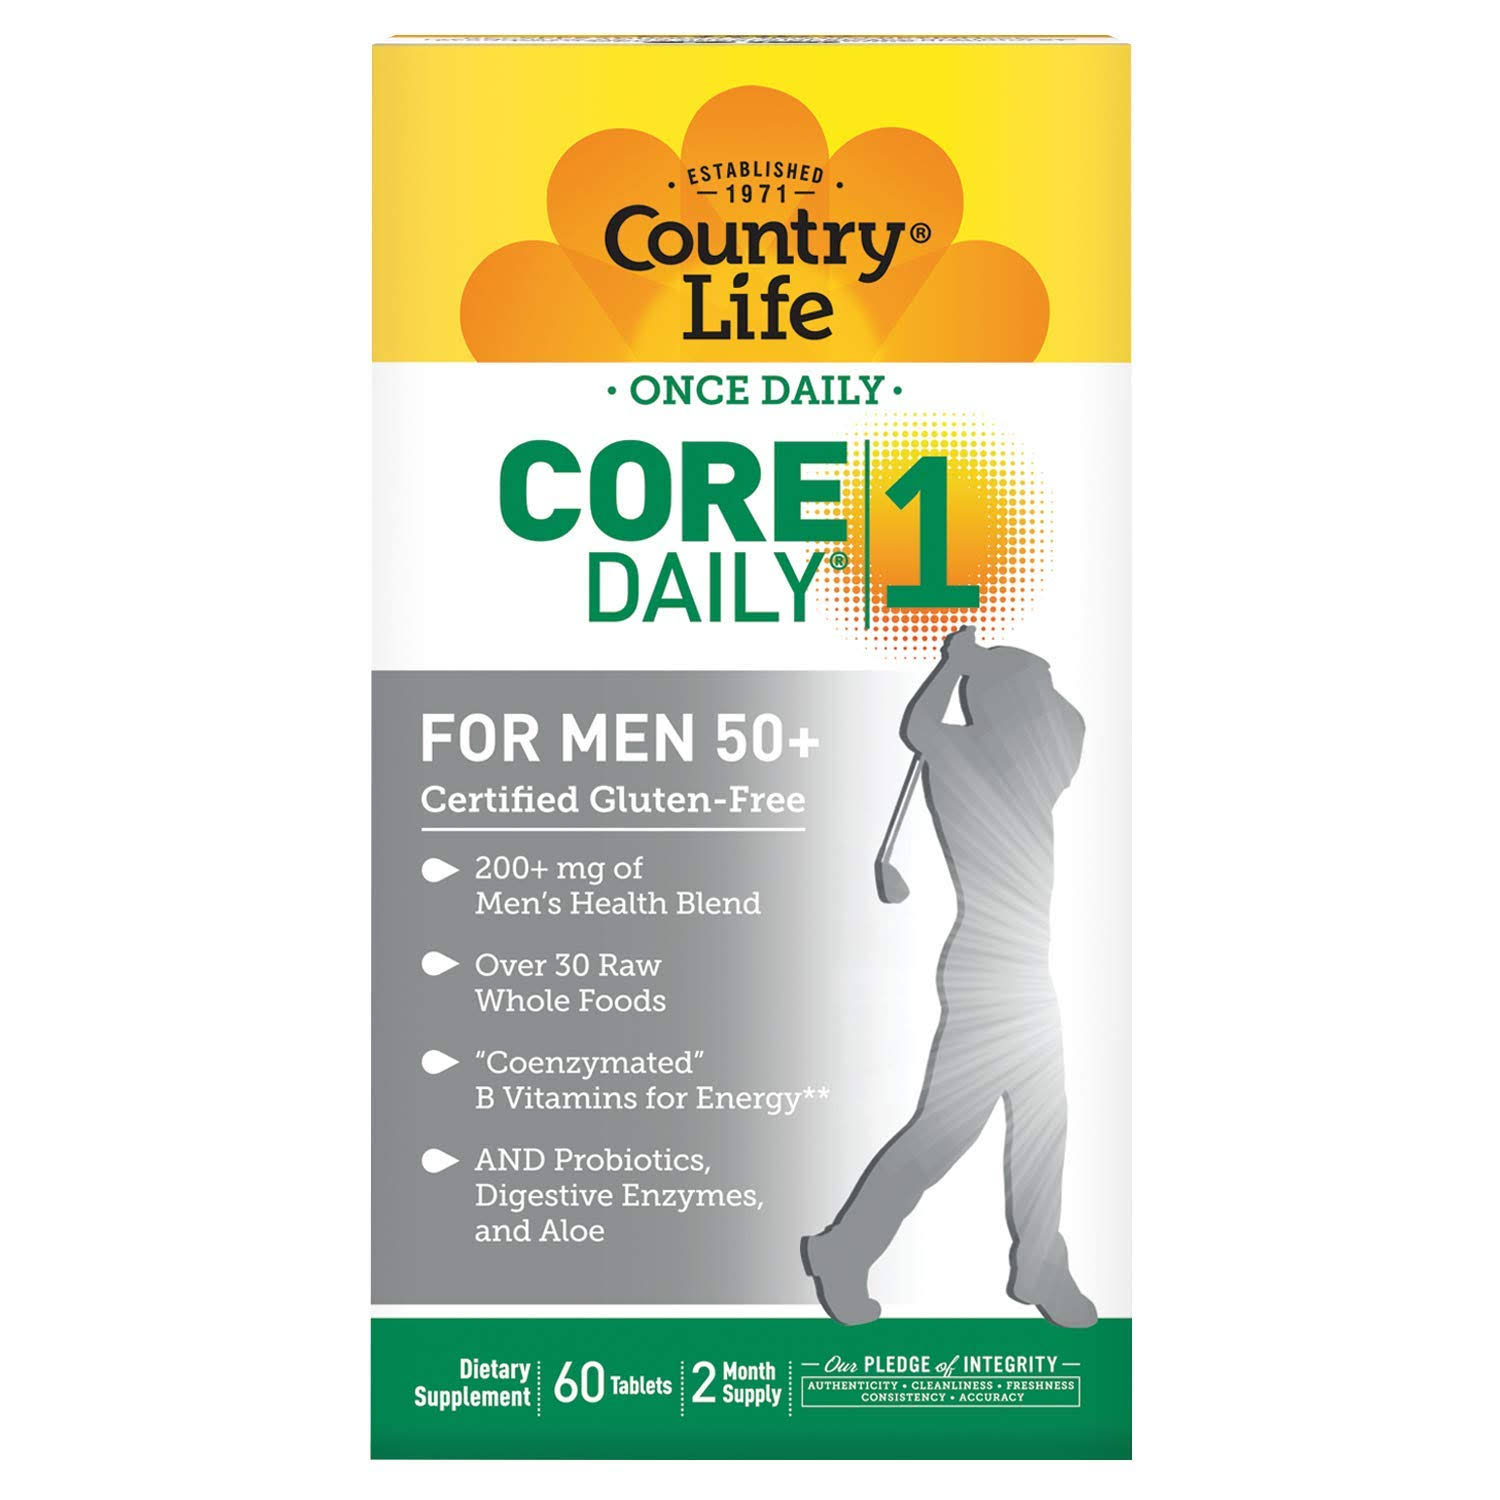 Country Life Core Daily 1 for Men 50 Plus Dietary Supplement - 60 Count